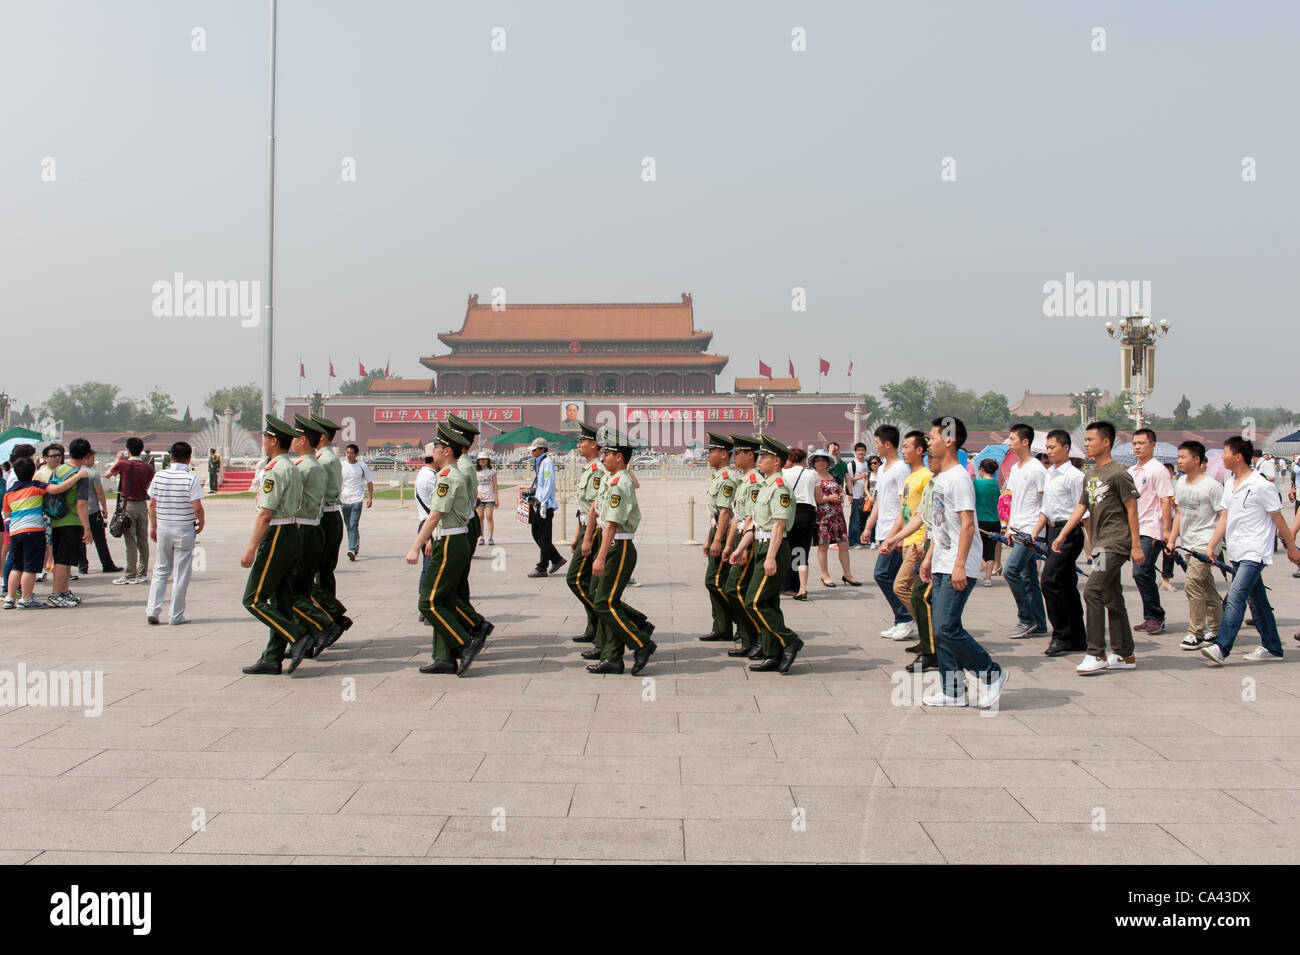 Military guards and plainclothes security officials marching on Tiananmen Square, Beijing, China on Monday June 4, 2012. Security is tight on Tiananmen square as June 4th 2012 marks the 23rd anniversary of the military crackdown on students protests at Tiananmen Square in 1989. Stock Photo